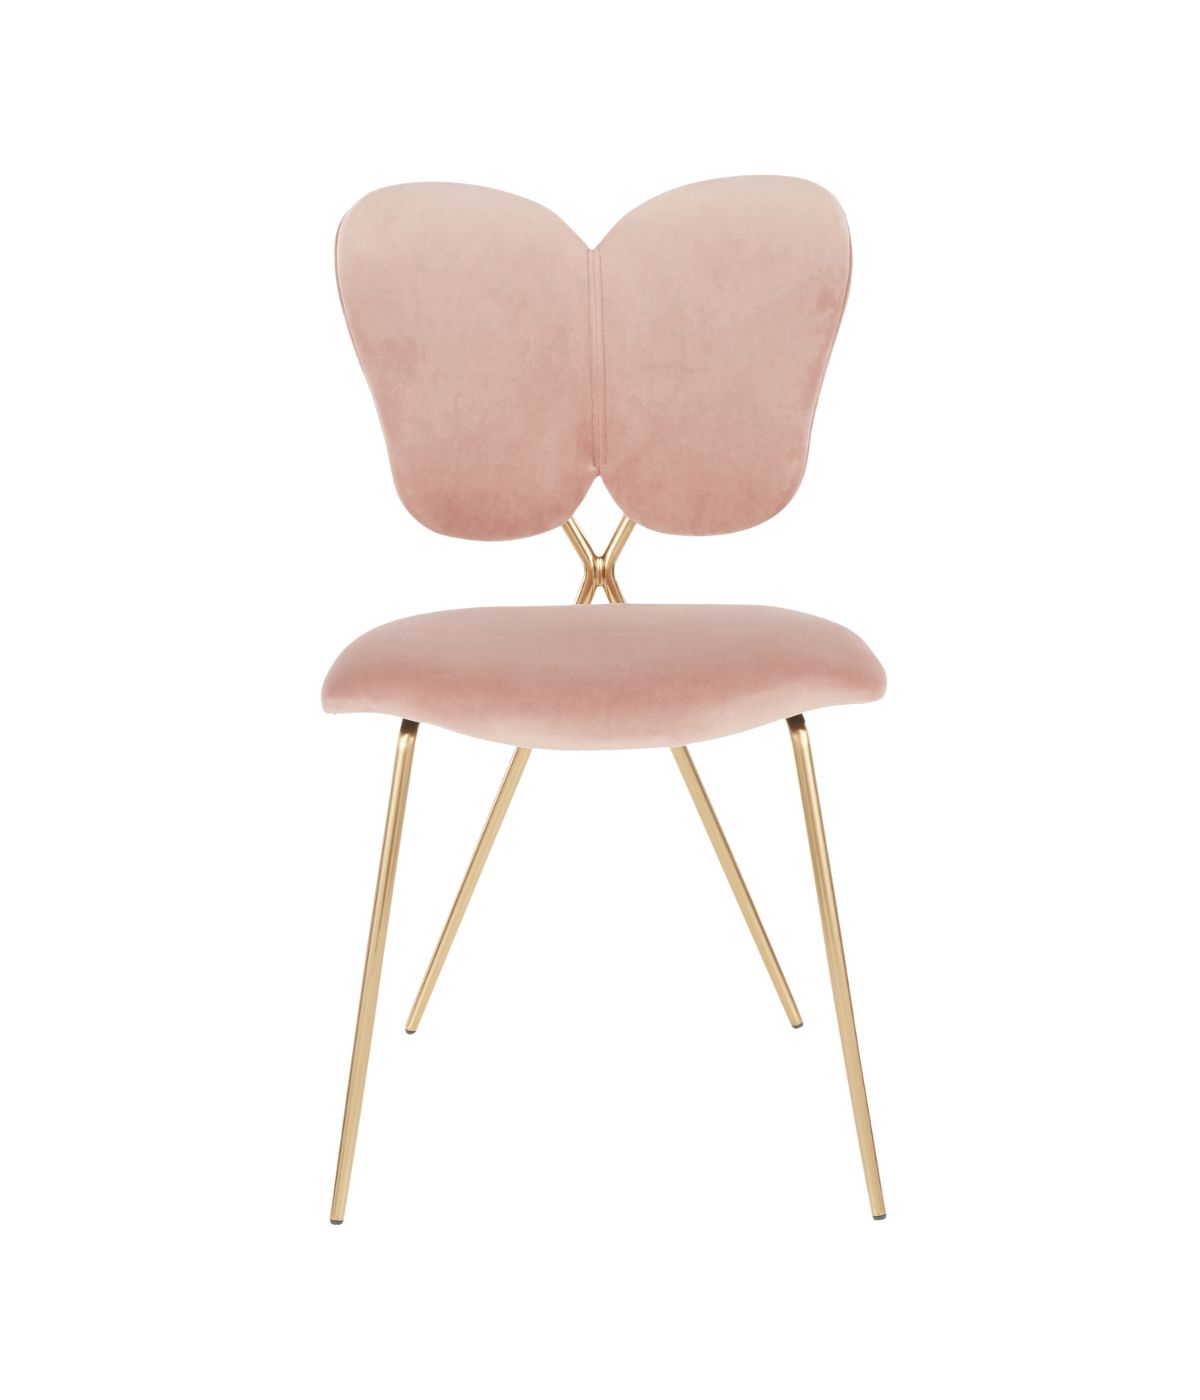 Madeline Chair - Set of 2 Gold & Blush Pink